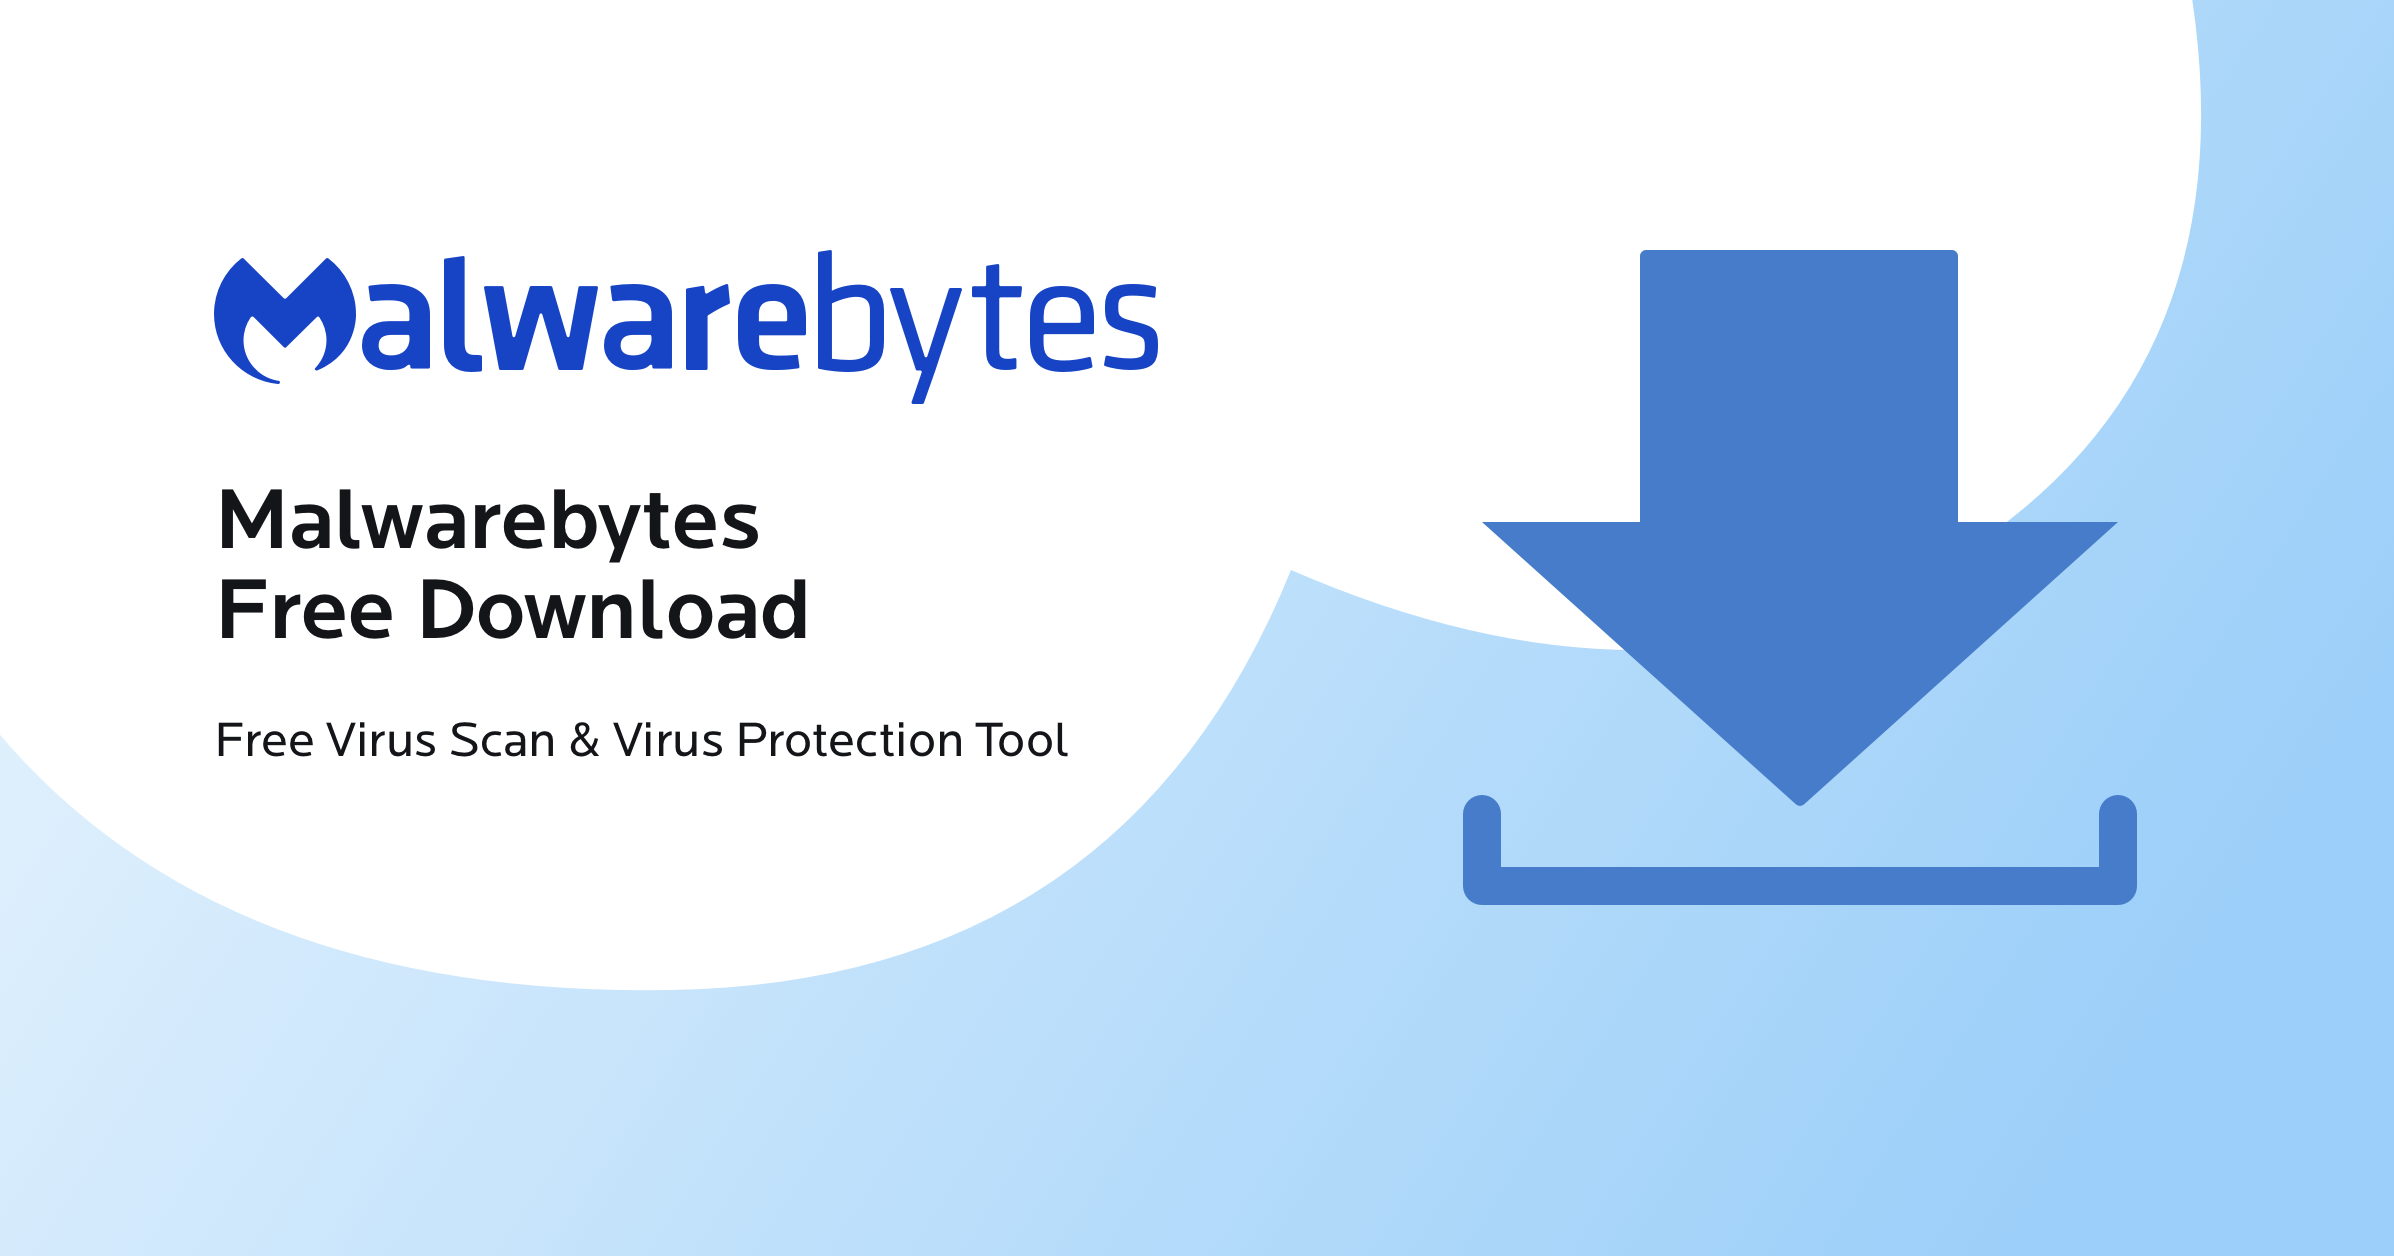 Download and install a reputable antimalware tool (e.g., Malwarebytes)
Open the antimalware tool